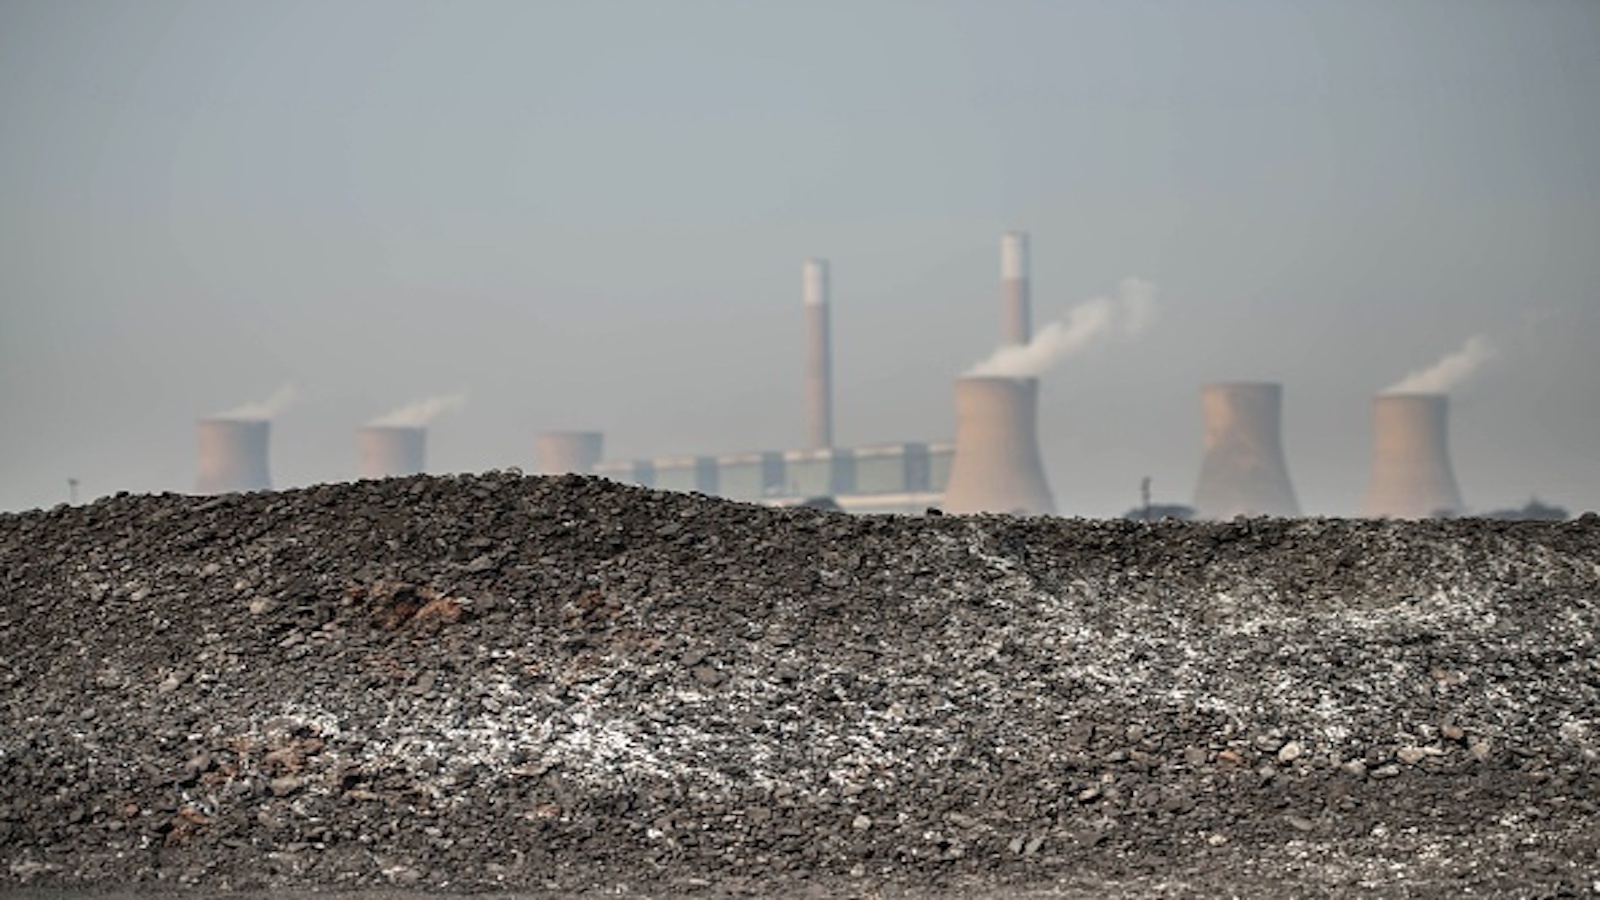 Coal fired power plant in South Africa